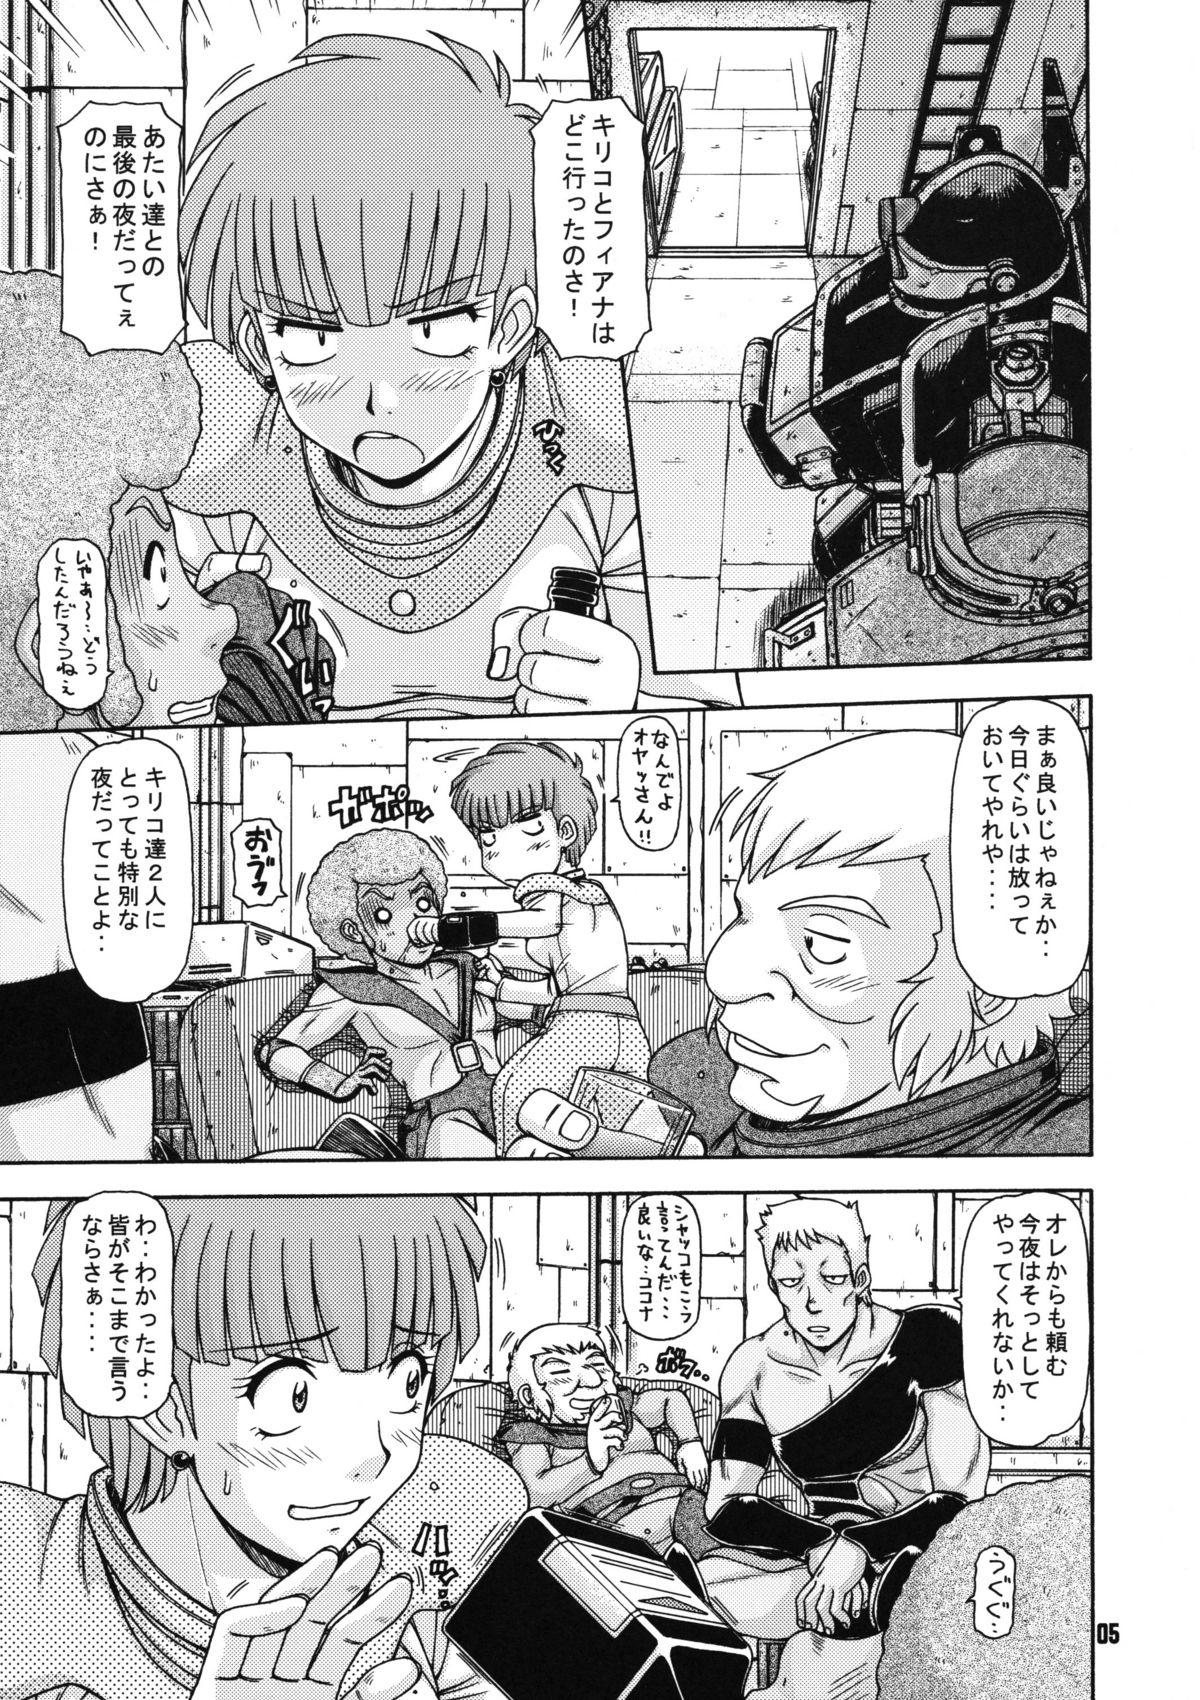 Ass Fuck RED MUFFLER Vo - Armored trooper votoms Amature - Page 4